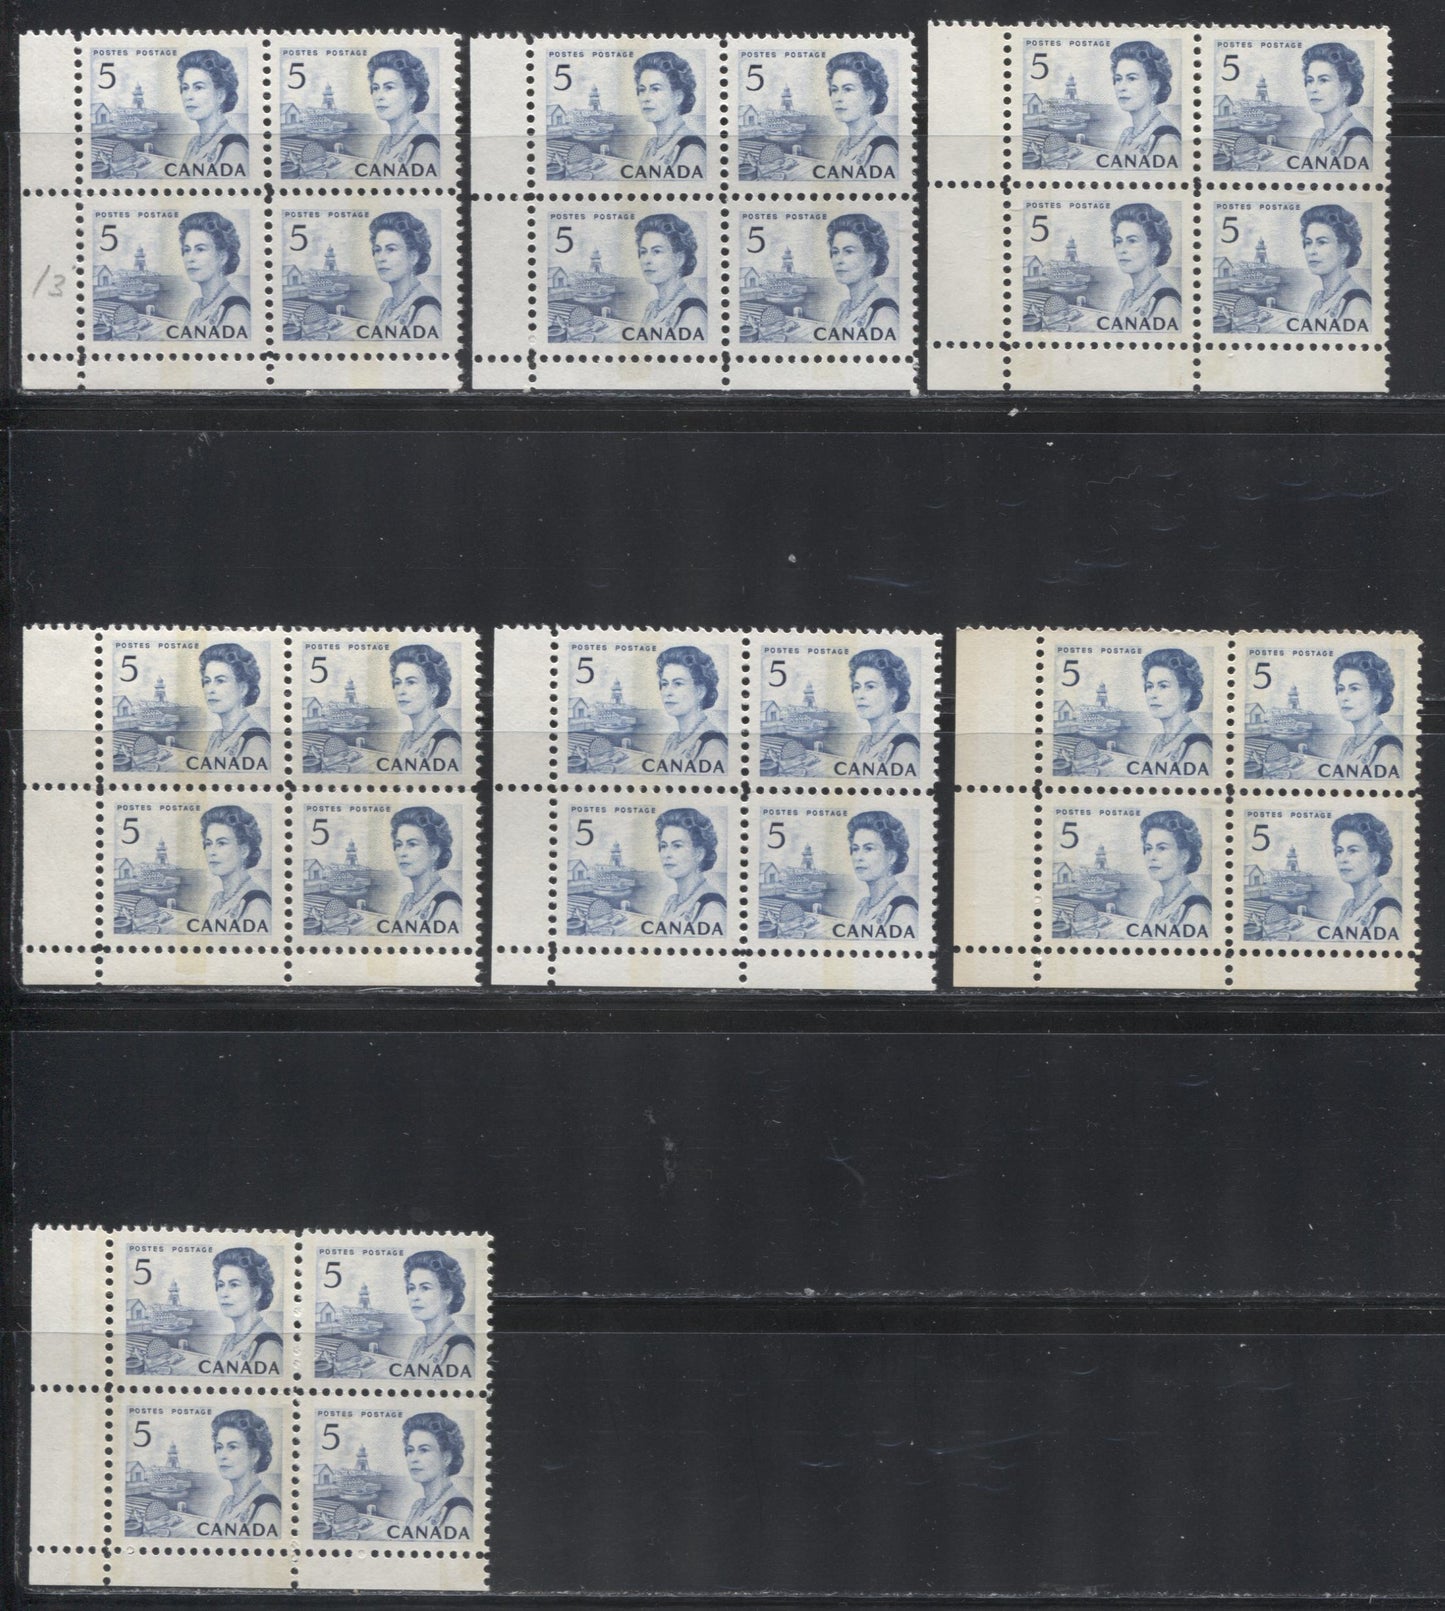 Lot 197 Canada #458p-459piii 5c Deep Blue Atlantic Fishing Village, 1967-1973 Centennial Definitive Issue, Lower Left Tagged Corner Blocks, A Specialized VFNH Group of 7 Blocks on Different Papers, Different Shades and Different Gums